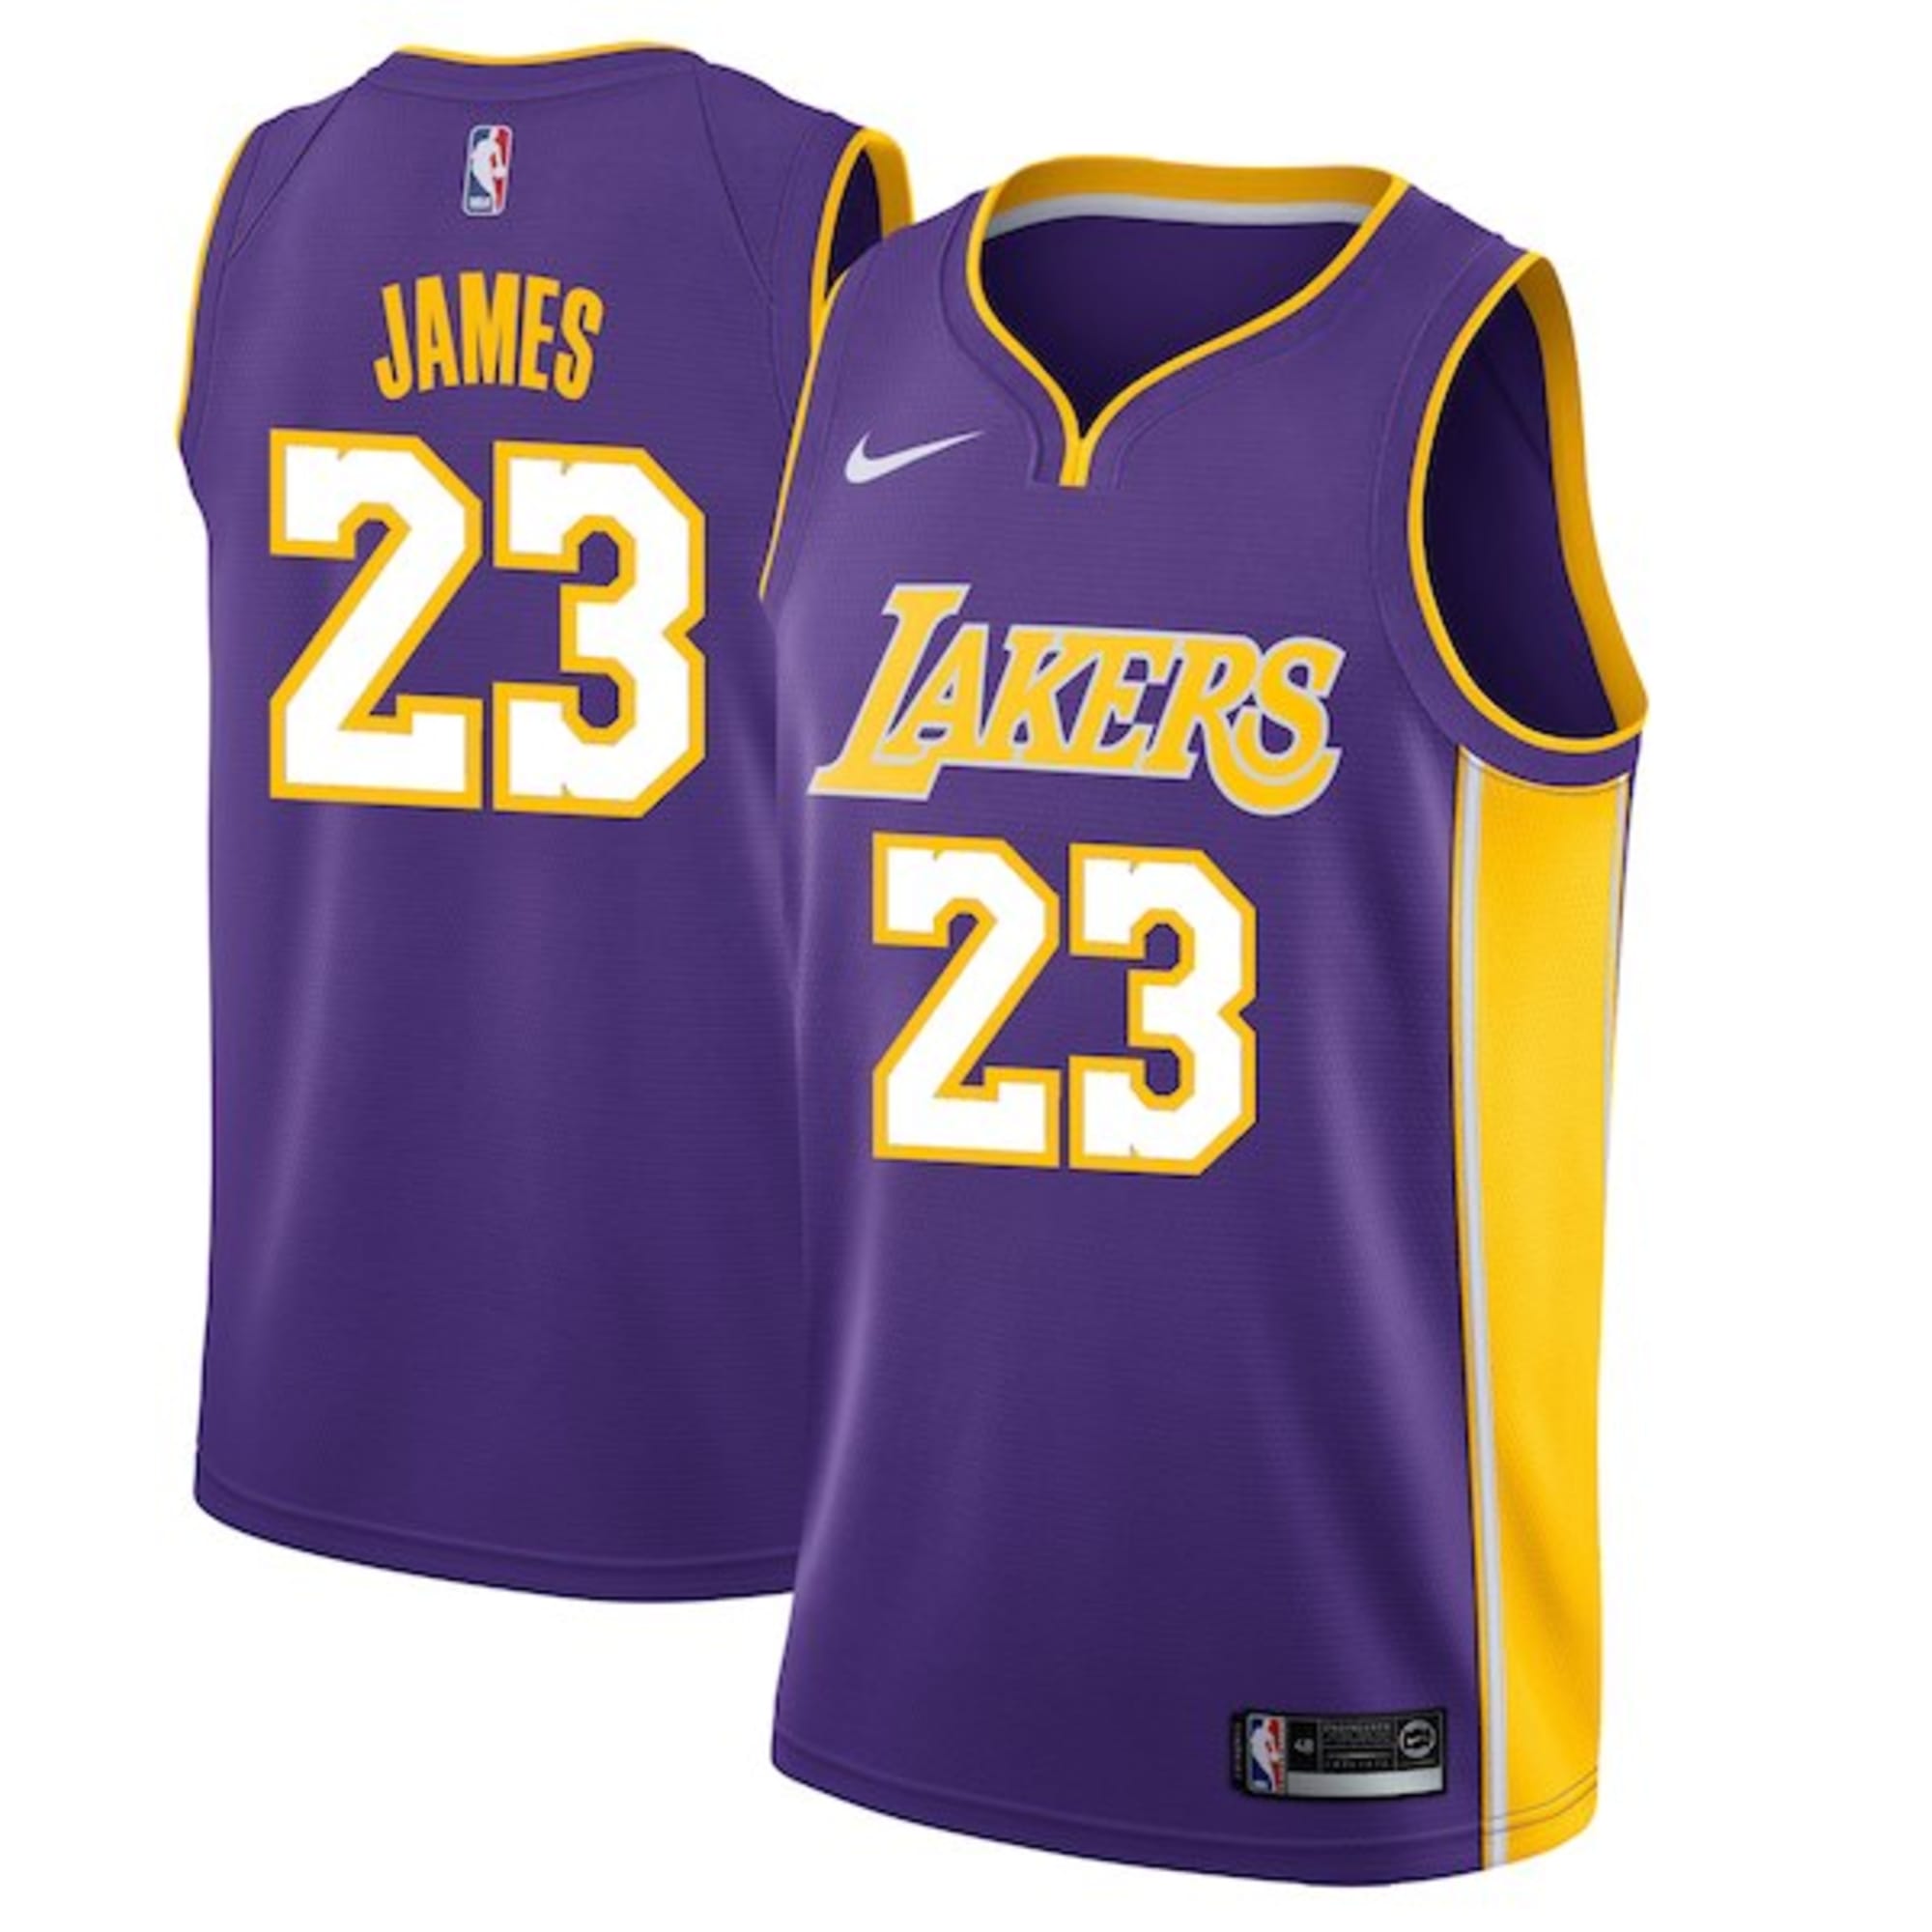 Los Angeles Lakers: Get your LeBron James jersey now